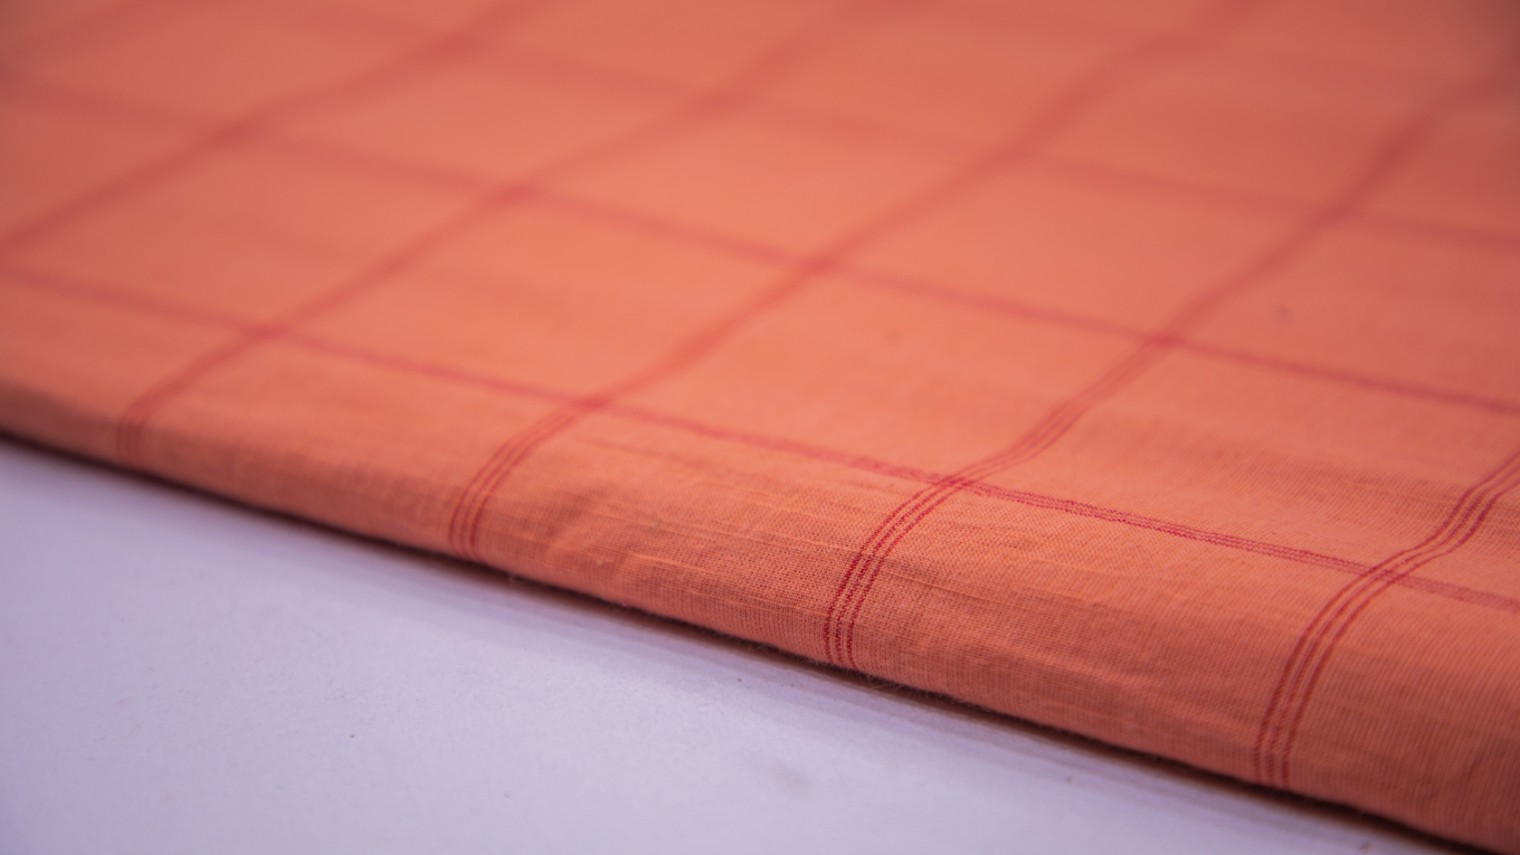 SALMON PEACH COLOR SOUTH COTTON HANDLOOM RED CHEX WEAVE FABRIC - 4285